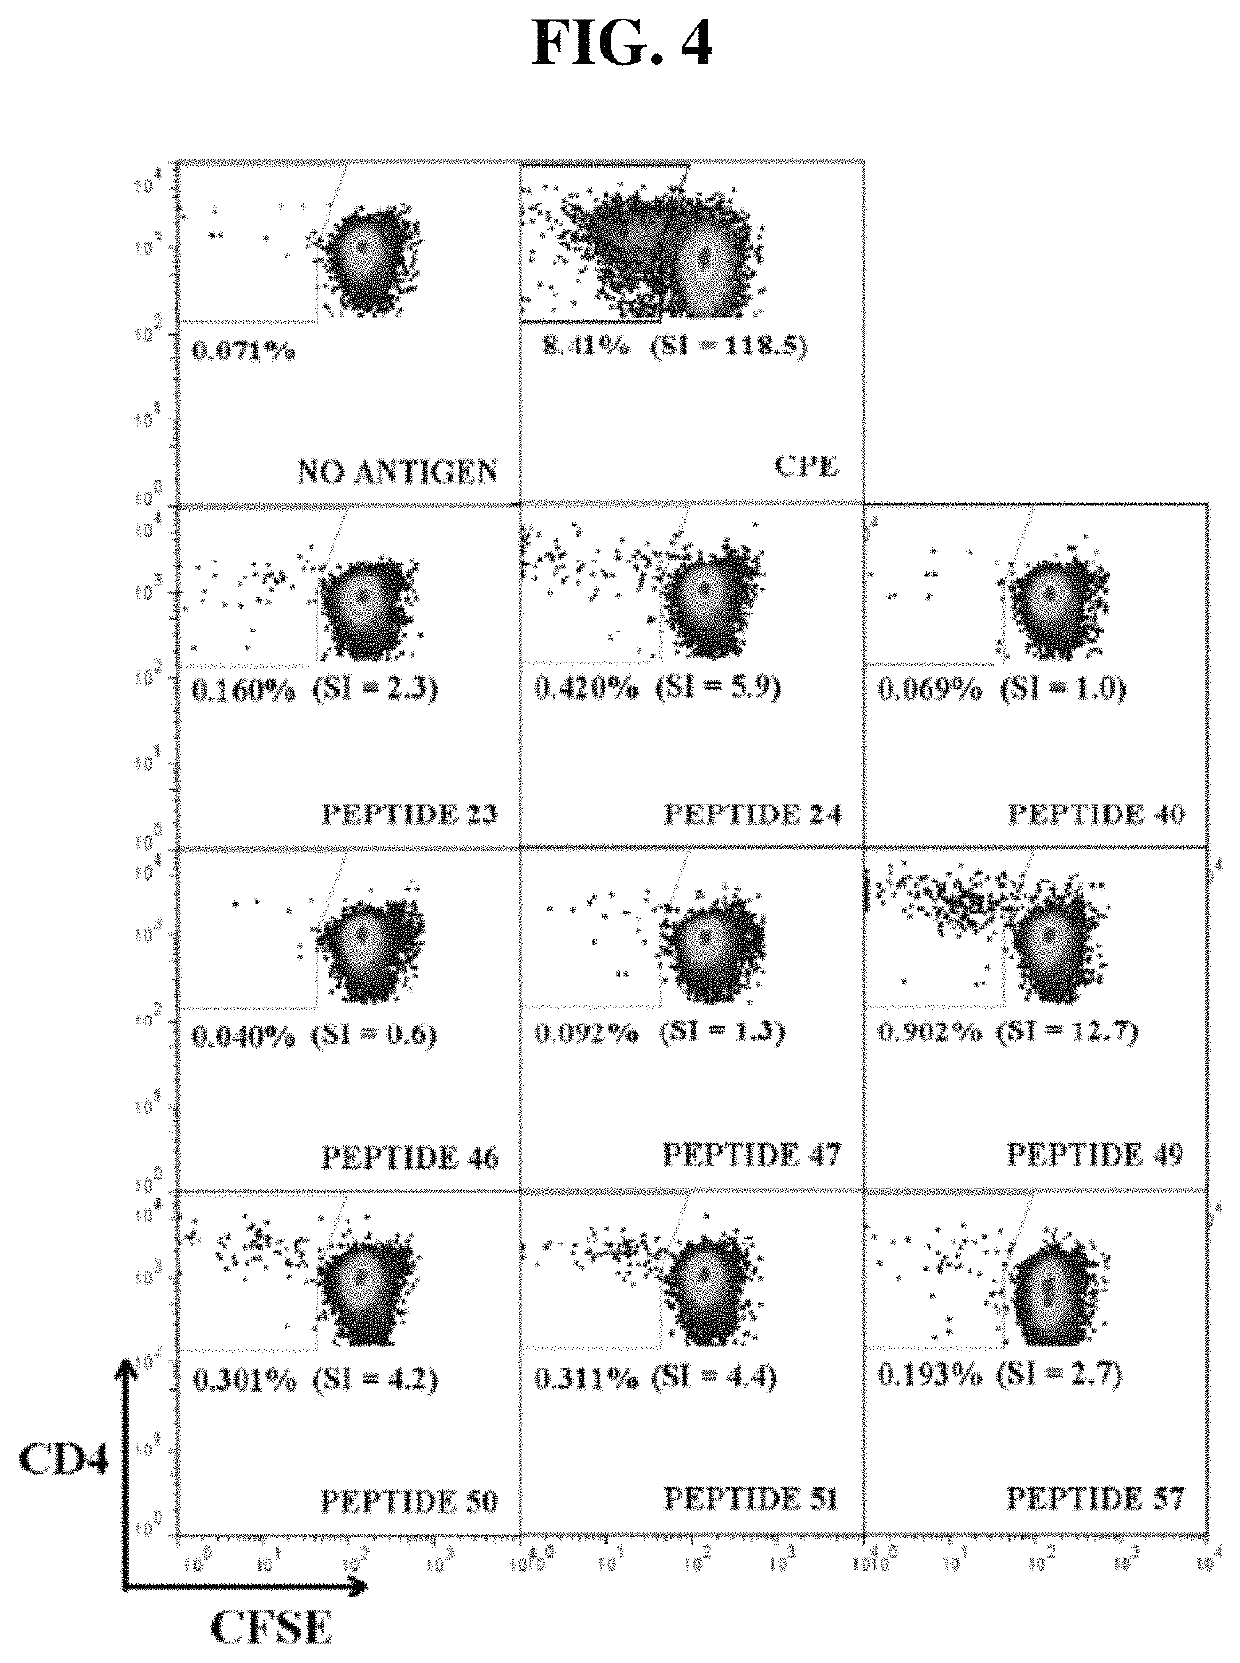 Immunotherapeutic molecules and uses thereof